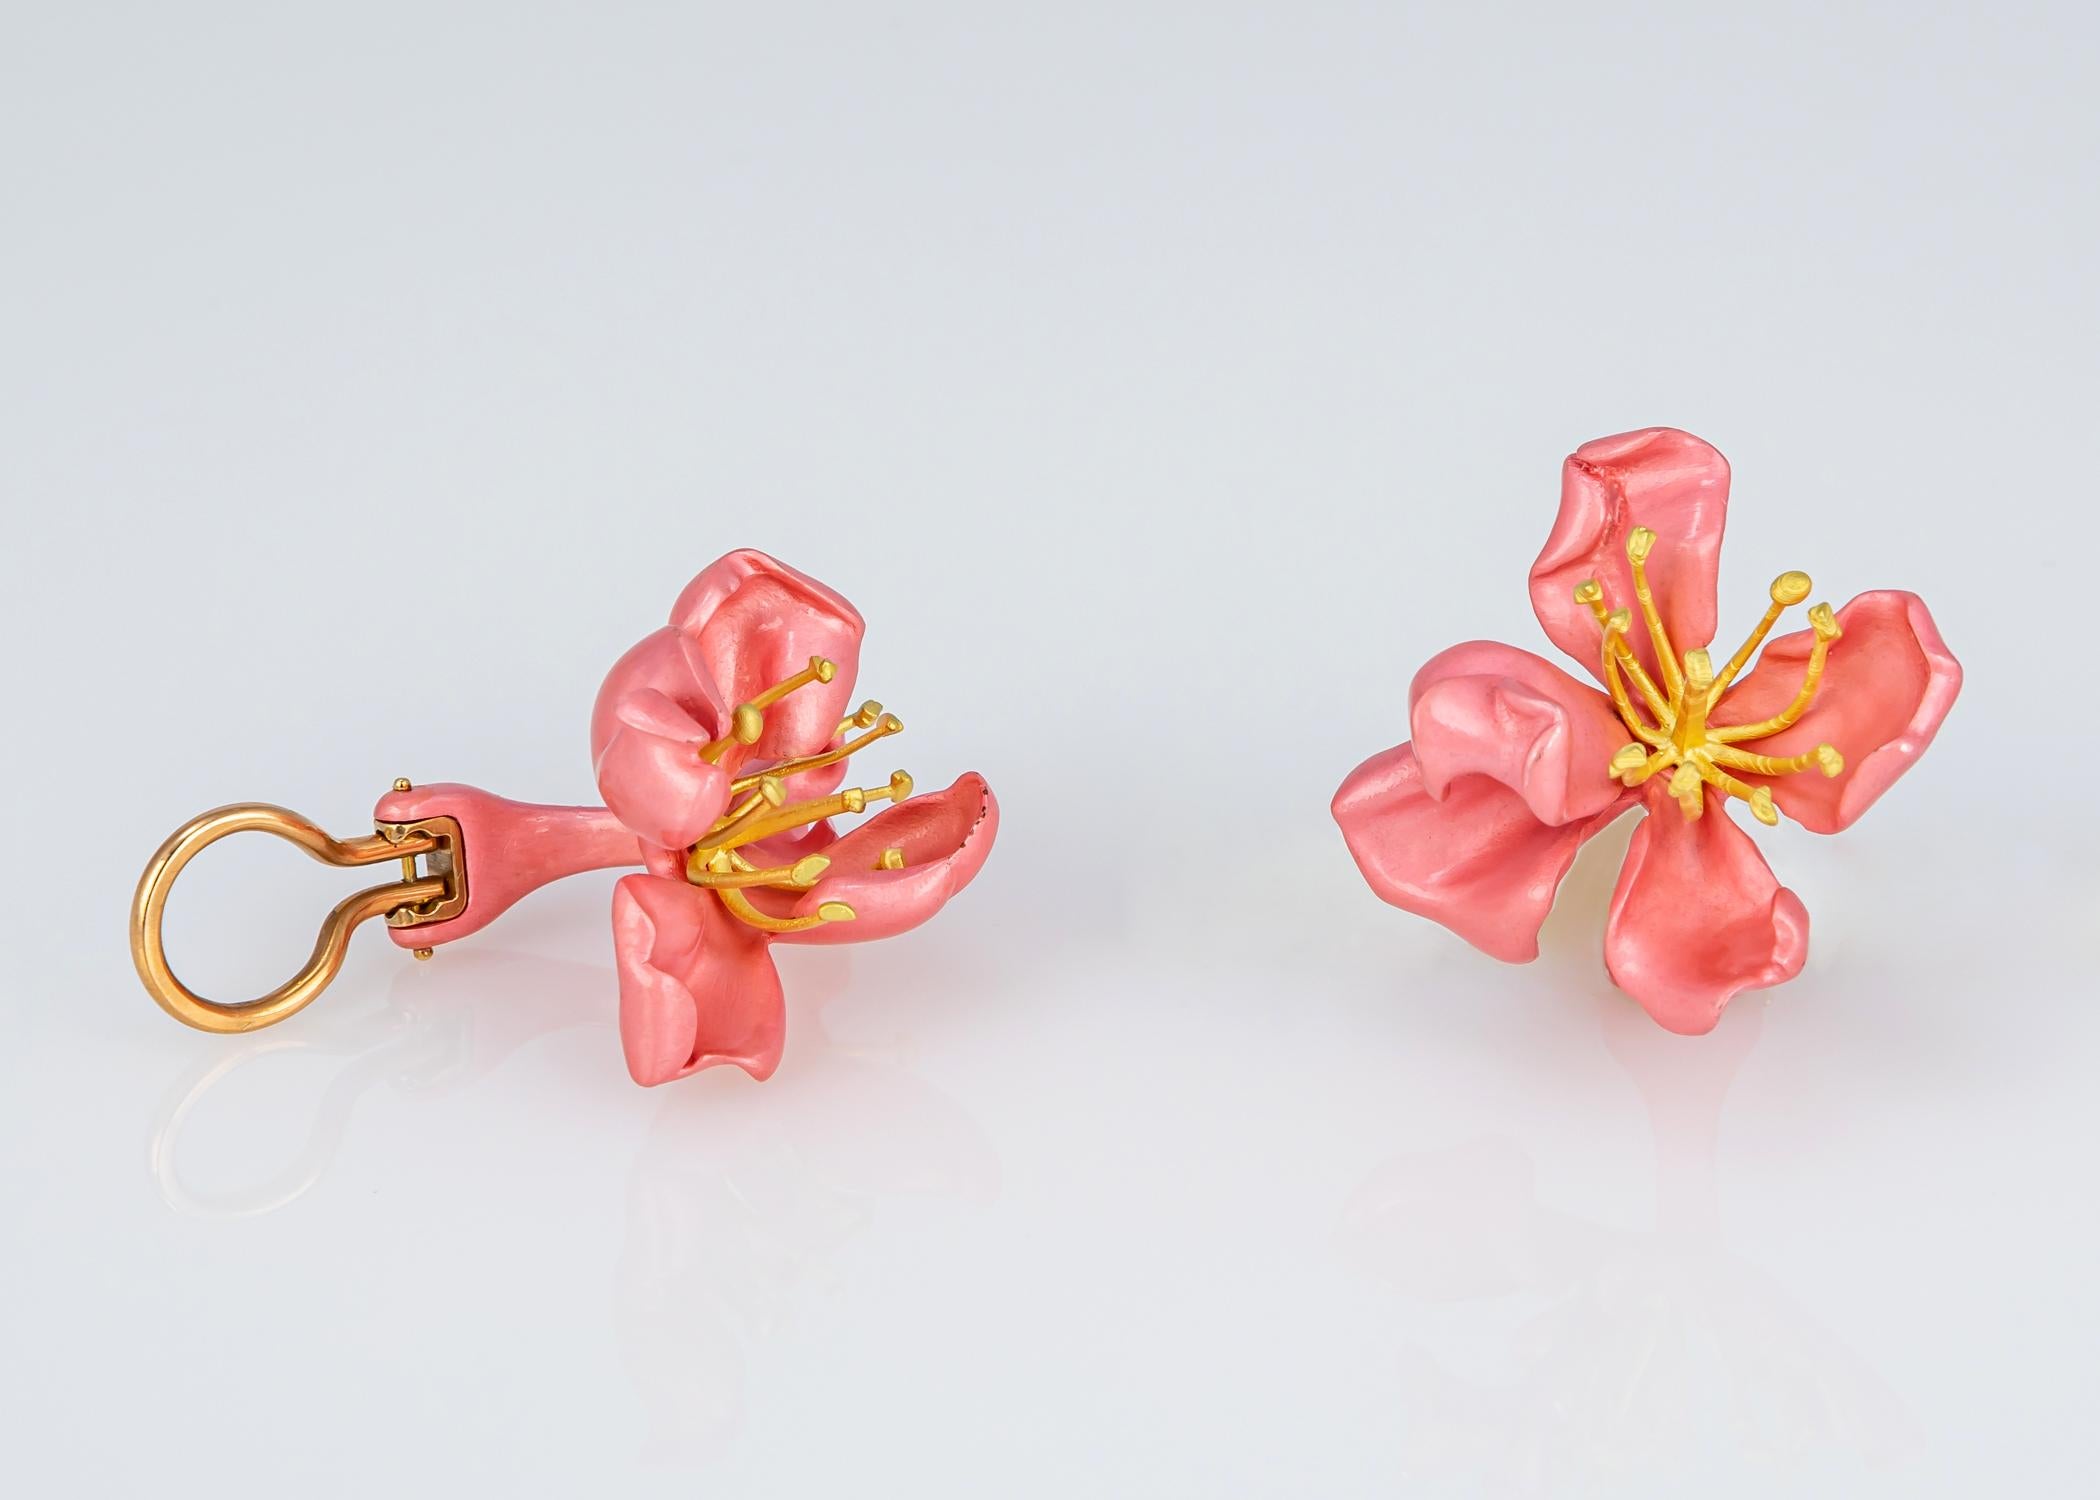 Contemporary JAR Gold, Silver and Enamel Almond Blossom Earrings